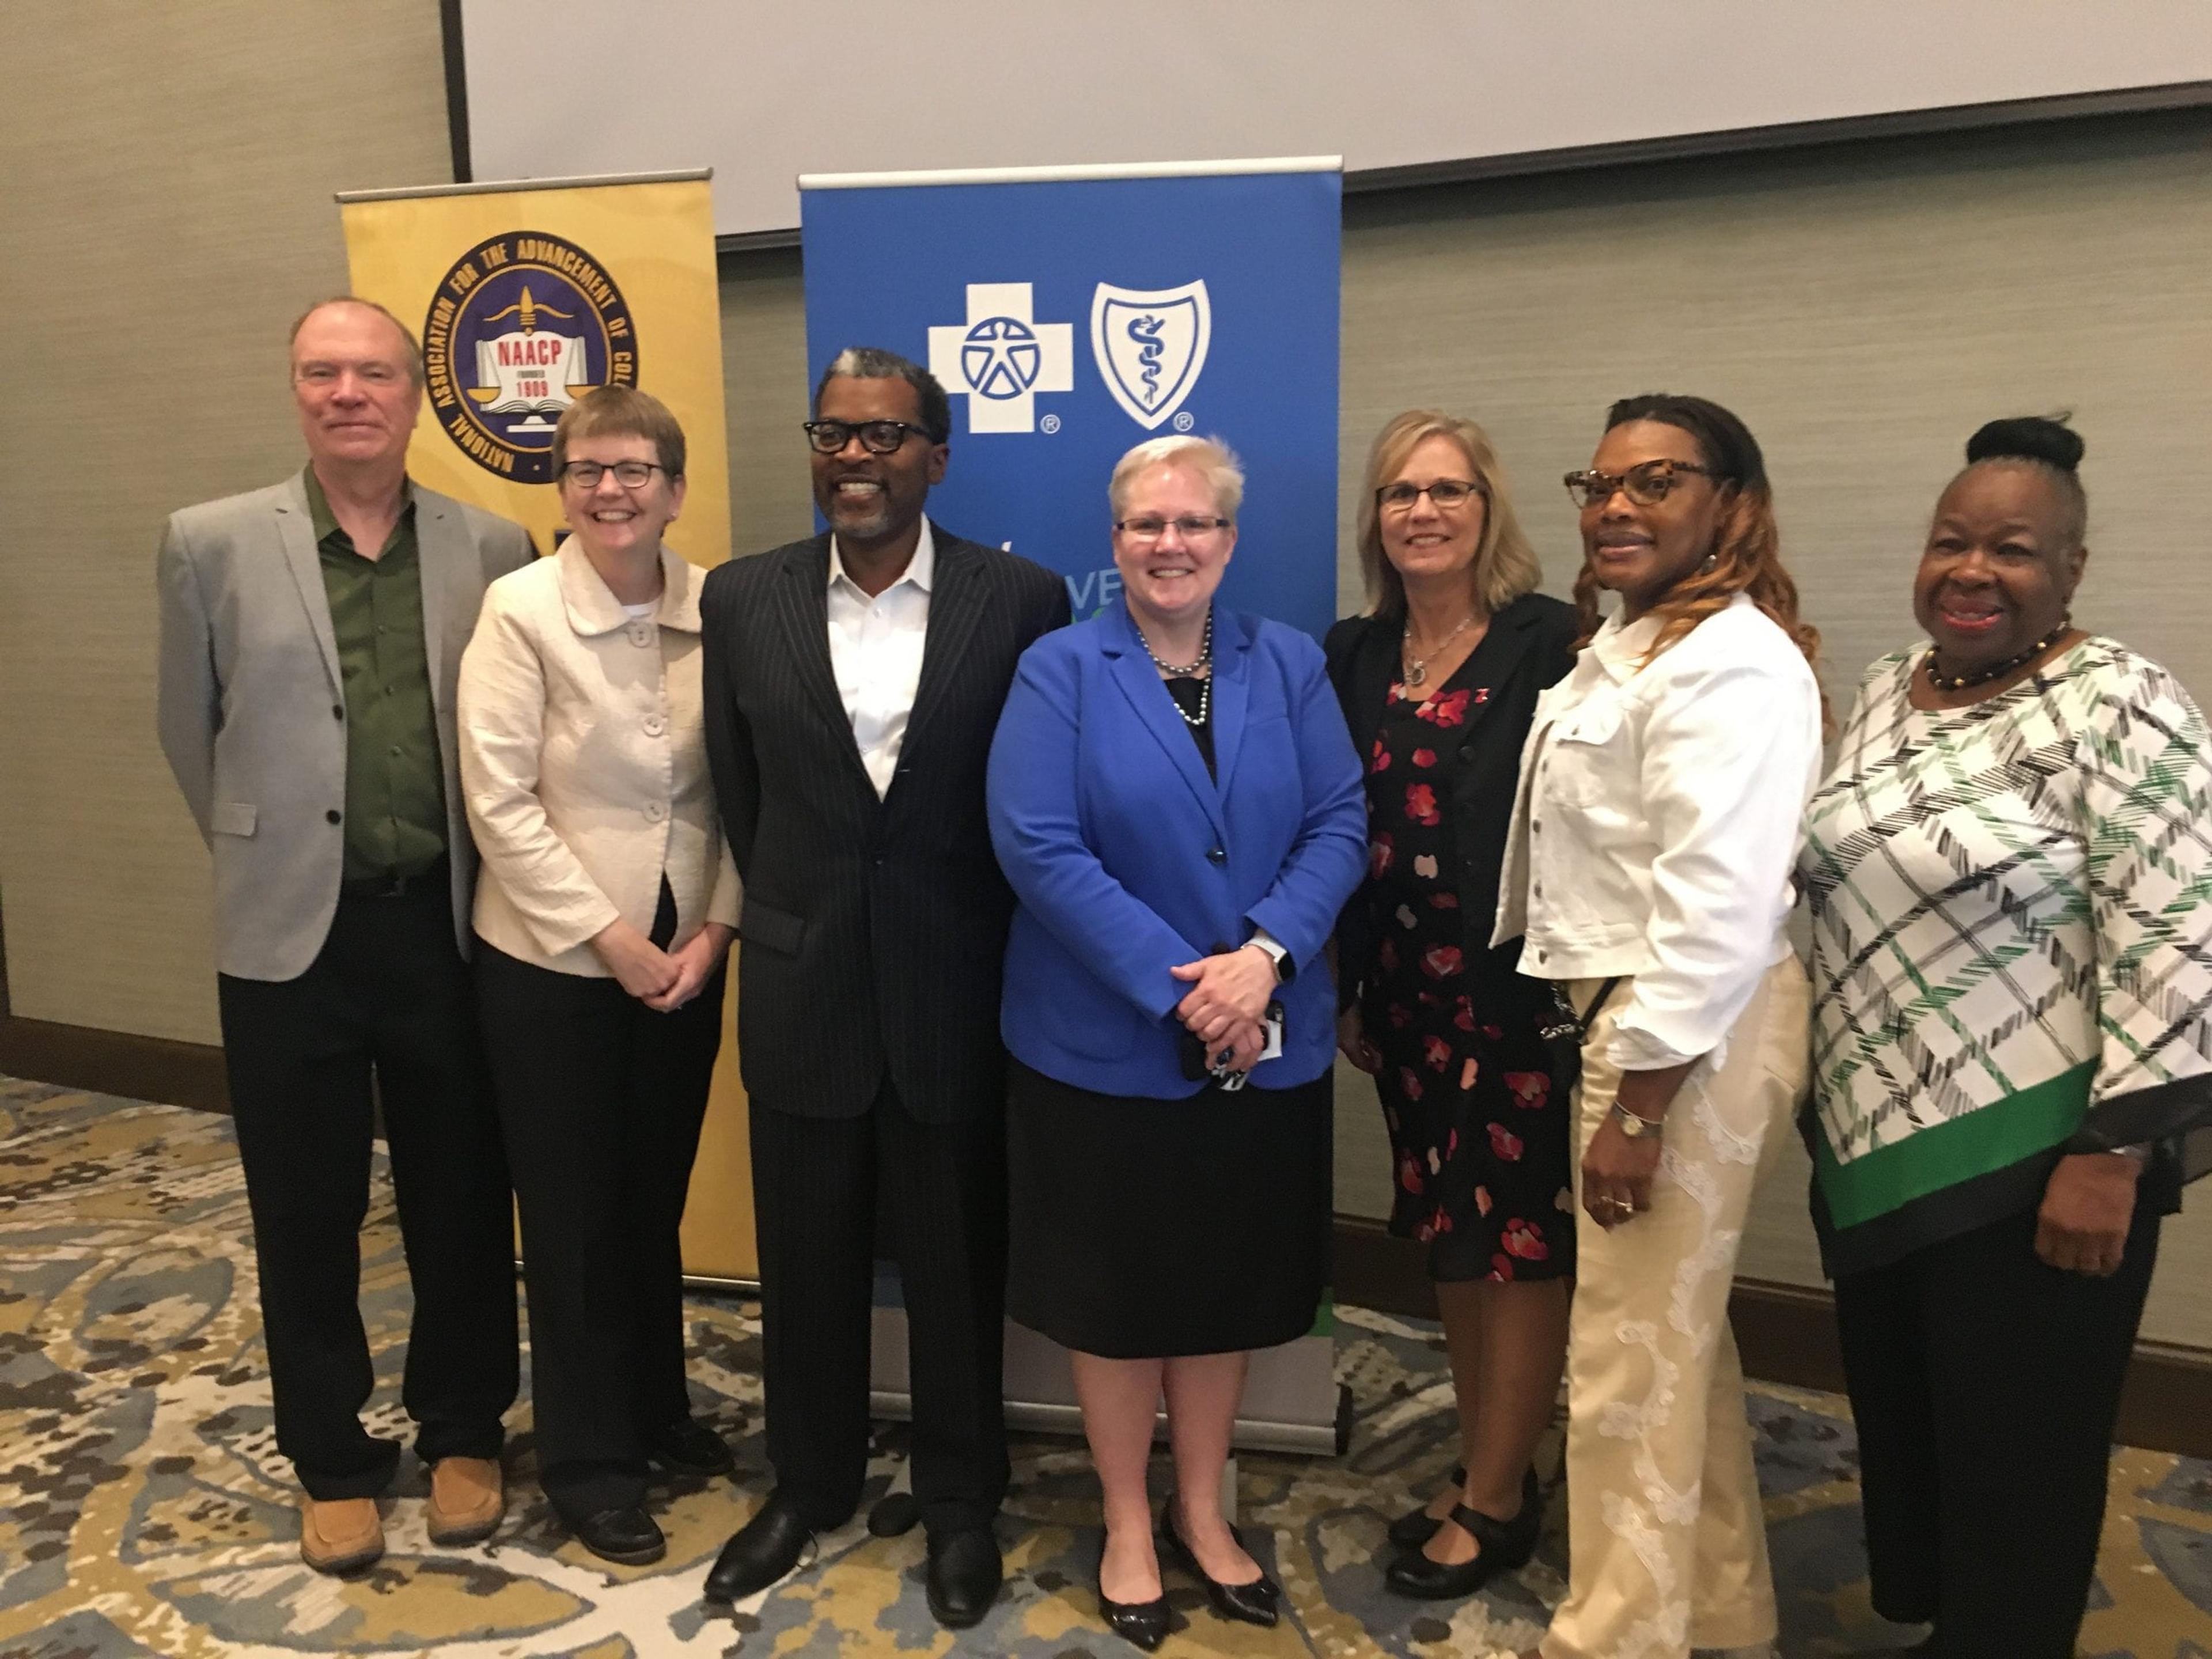 Pictured left to right: Tim Collier, Suzanne Miller Allen, director, Community Responsibility, BCBSM, Cle Jackson, senior liaison, Community Responsibility, BCBSM, Susan Woolner, Kellie Norton, director, West Michigan & Upper Peninsula Administration, Health Plan Business, BCBSM, Dr. Denice Logan, medical director, Blue Care Network and Ellen James, 2nd vice president, Greater Grand Rapids NAACP.